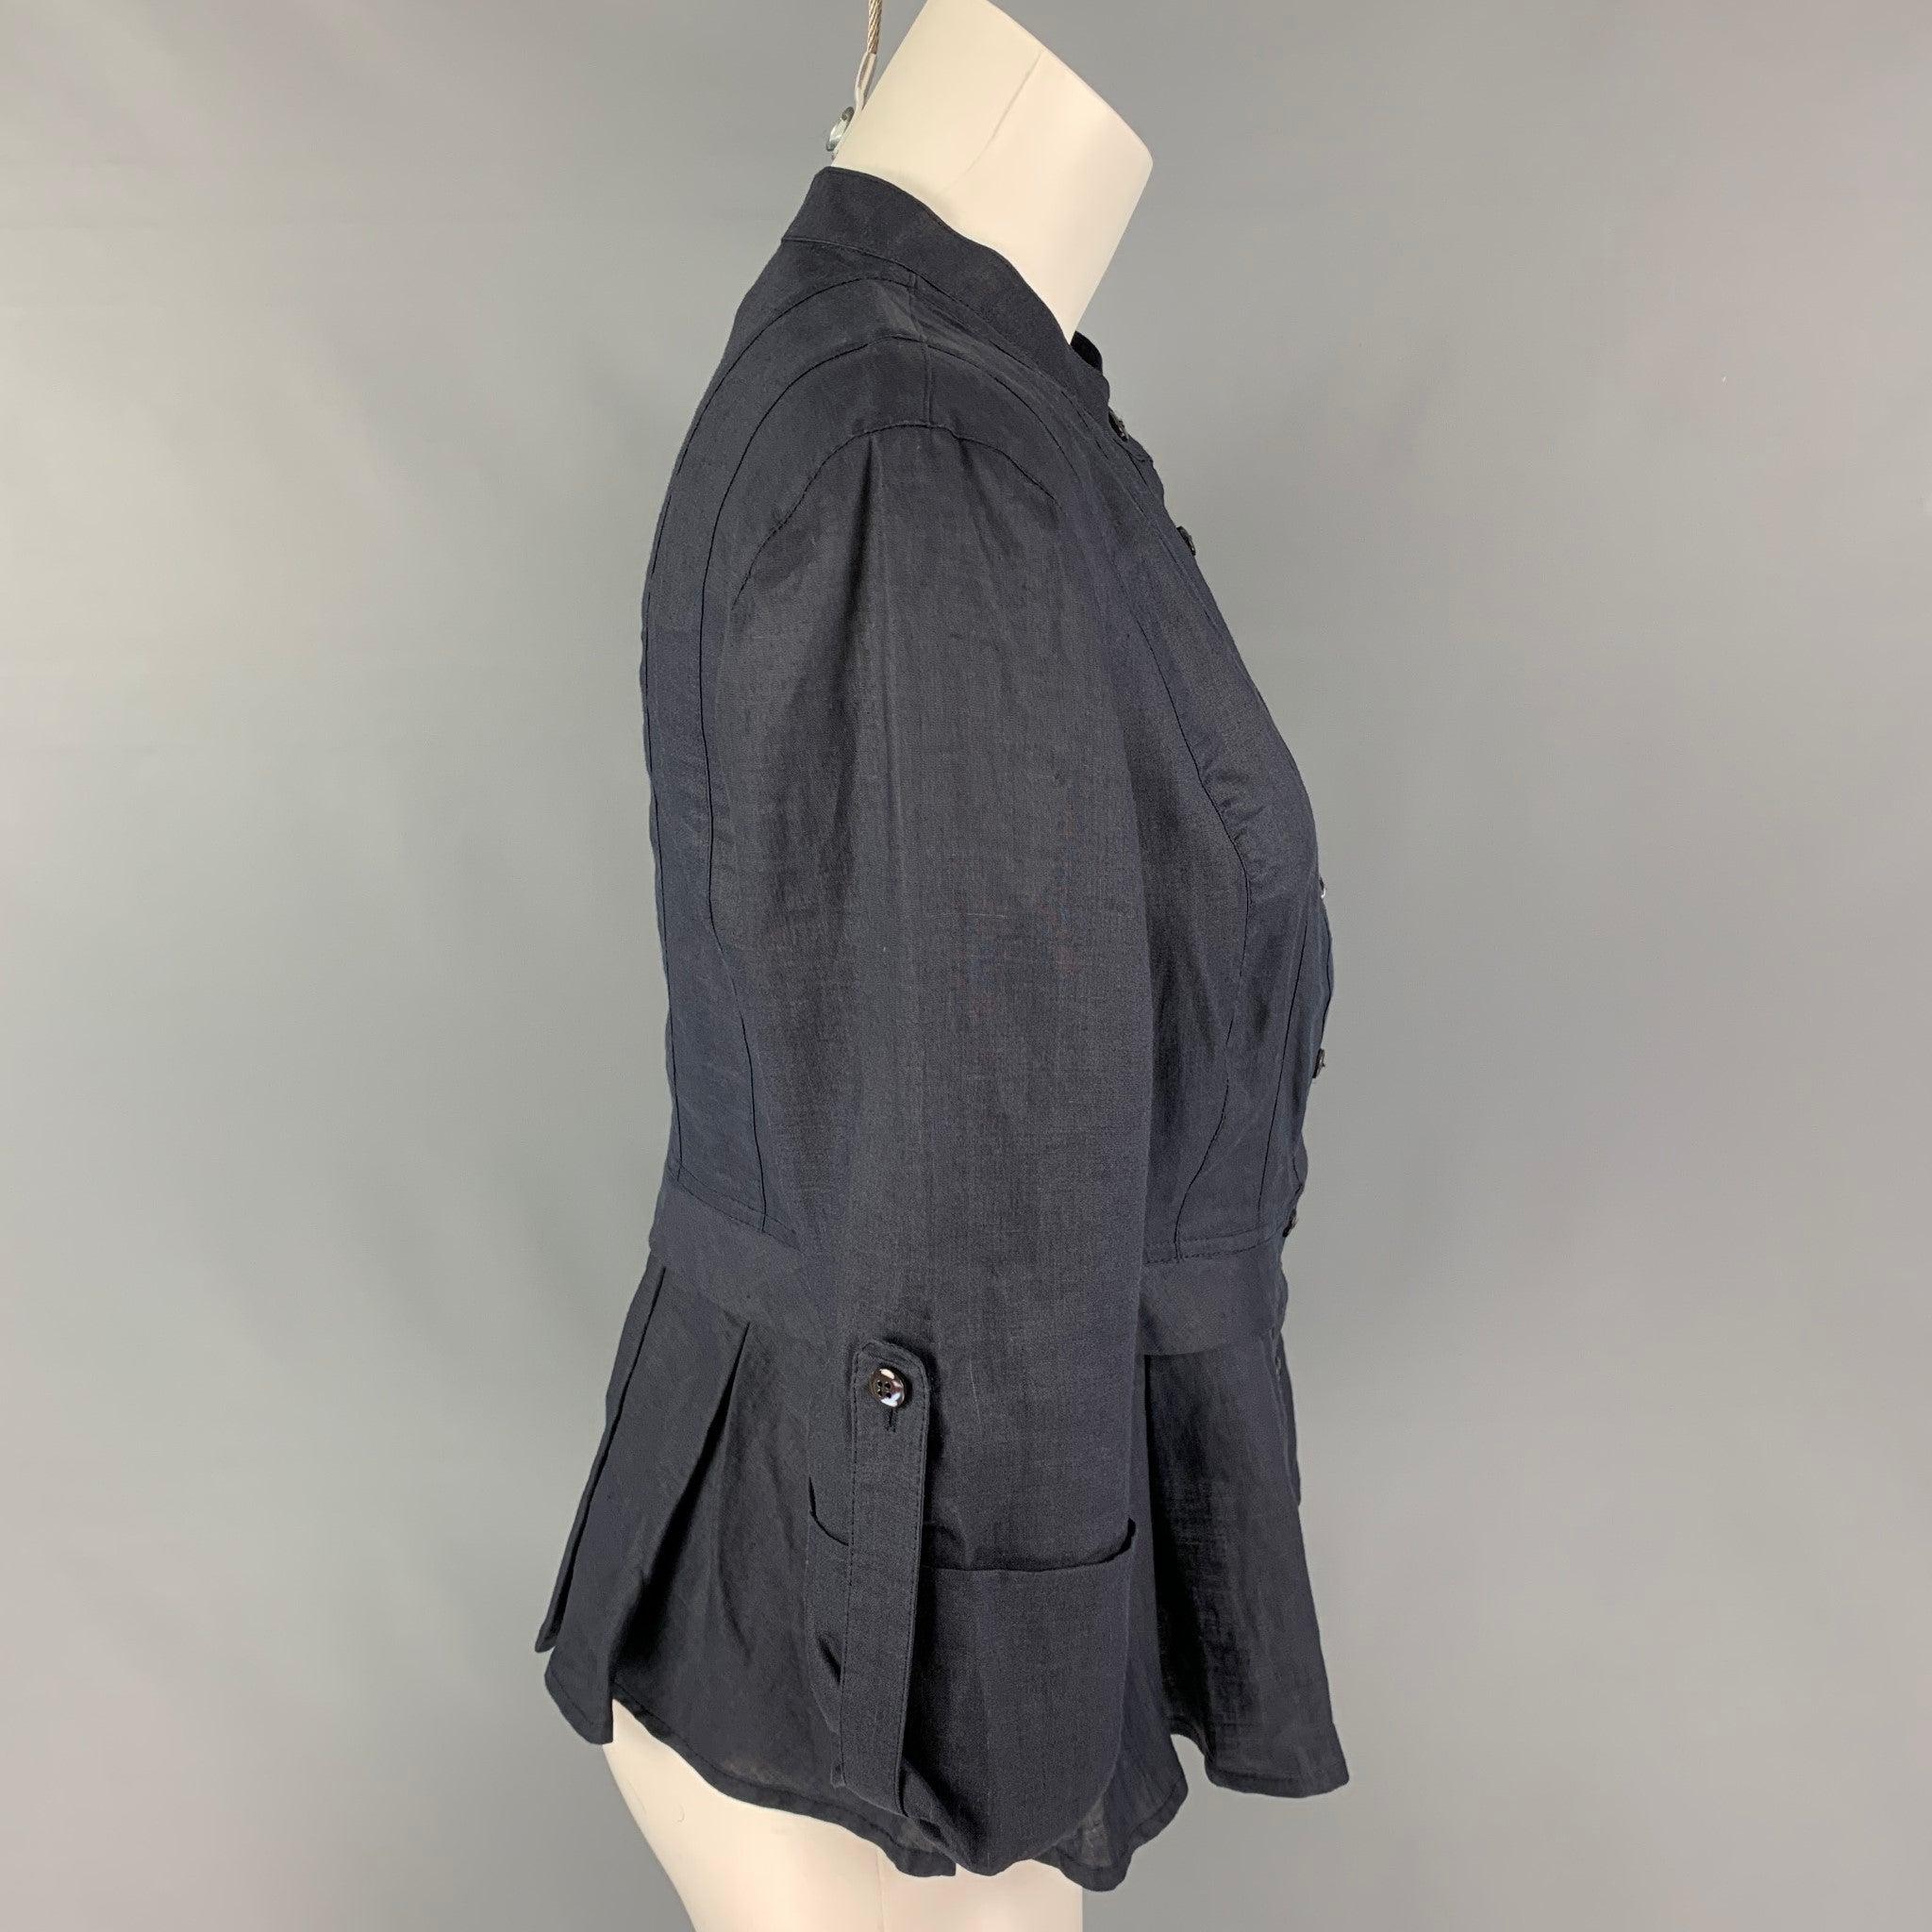 ARMANI COLLEZIONI top comes in a navy viscose featuring a pleated style, collarless, 3/4 sleeves, and a buttoned closure.
Very Good
Pre-Owned Condition. 

Marked:   6 

Measurements: 
 
Shoulder: 16.5 inches  Bust: 34 inches  Sleeve: 15.5 inches 